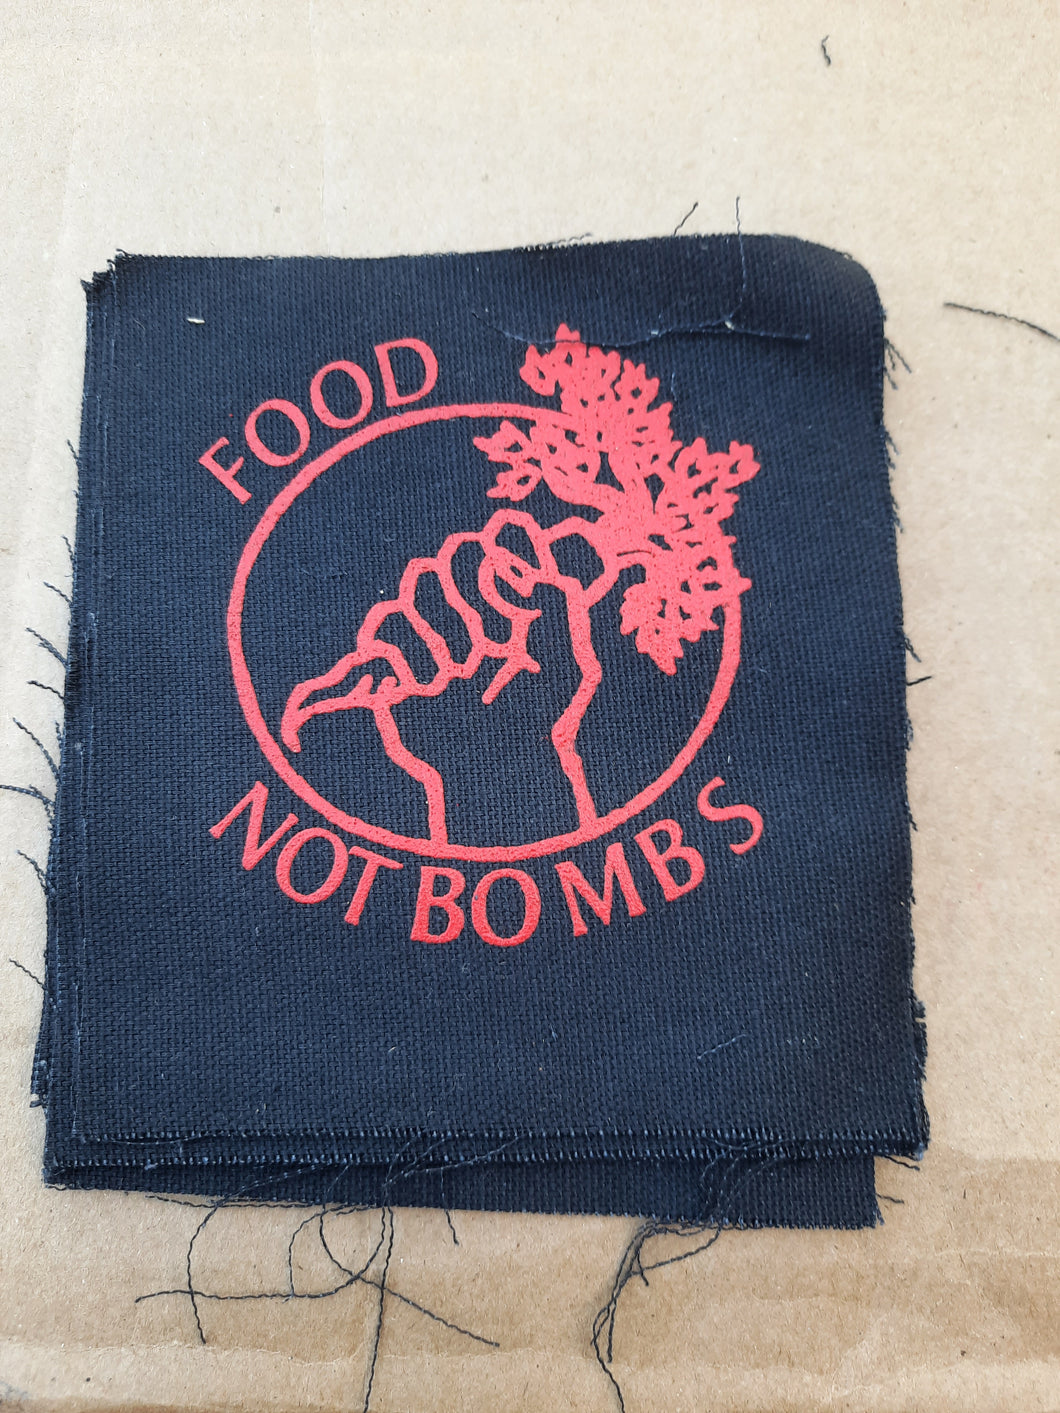 Food not bombs canvas patch